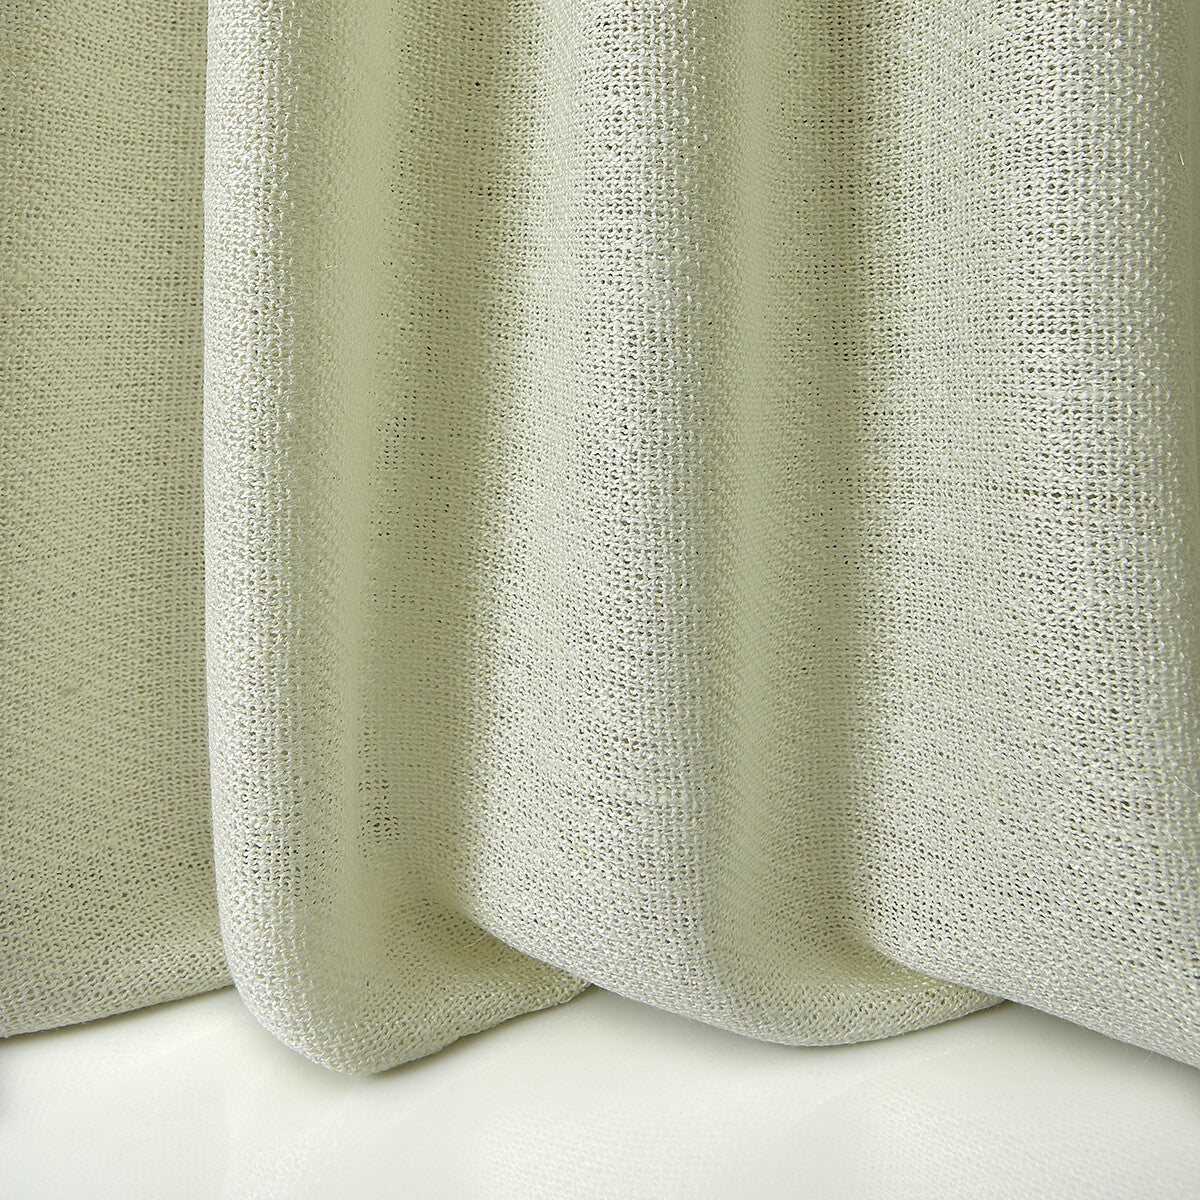 Brava fabric in 7 color - pattern LZ-30194.07.0 - by Kravet Design in the Lizzo collection